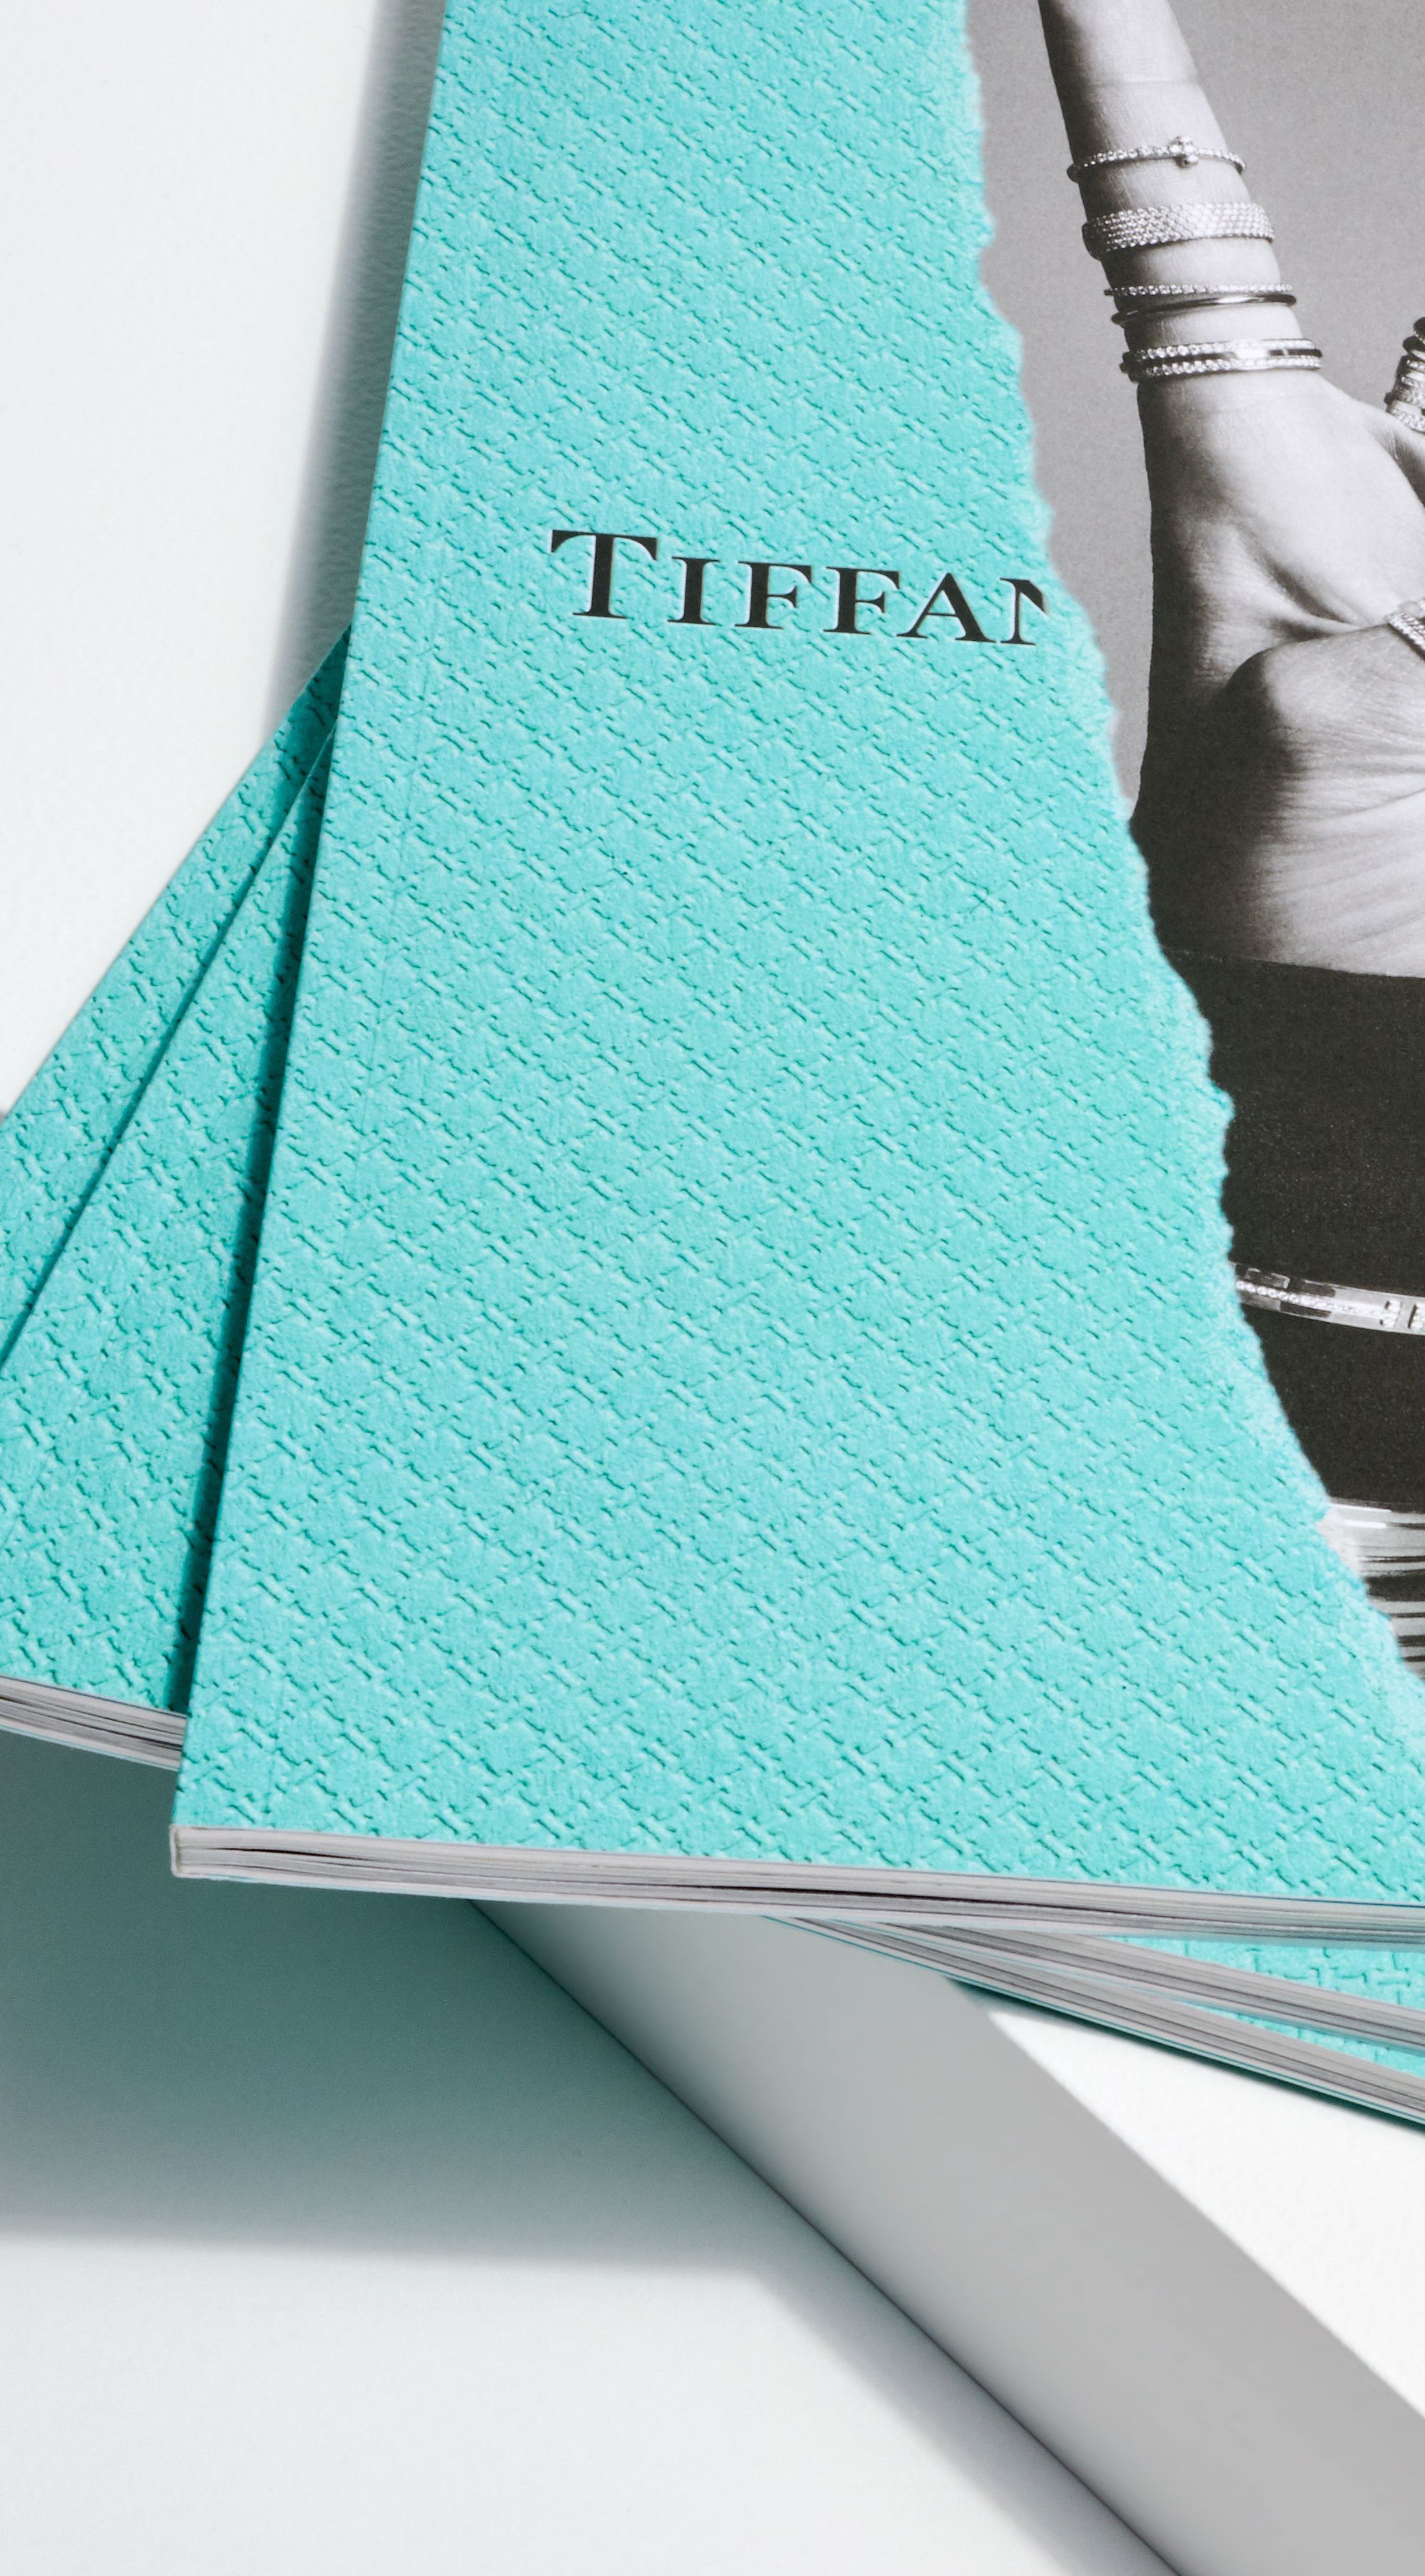 This is Tiffany cover design